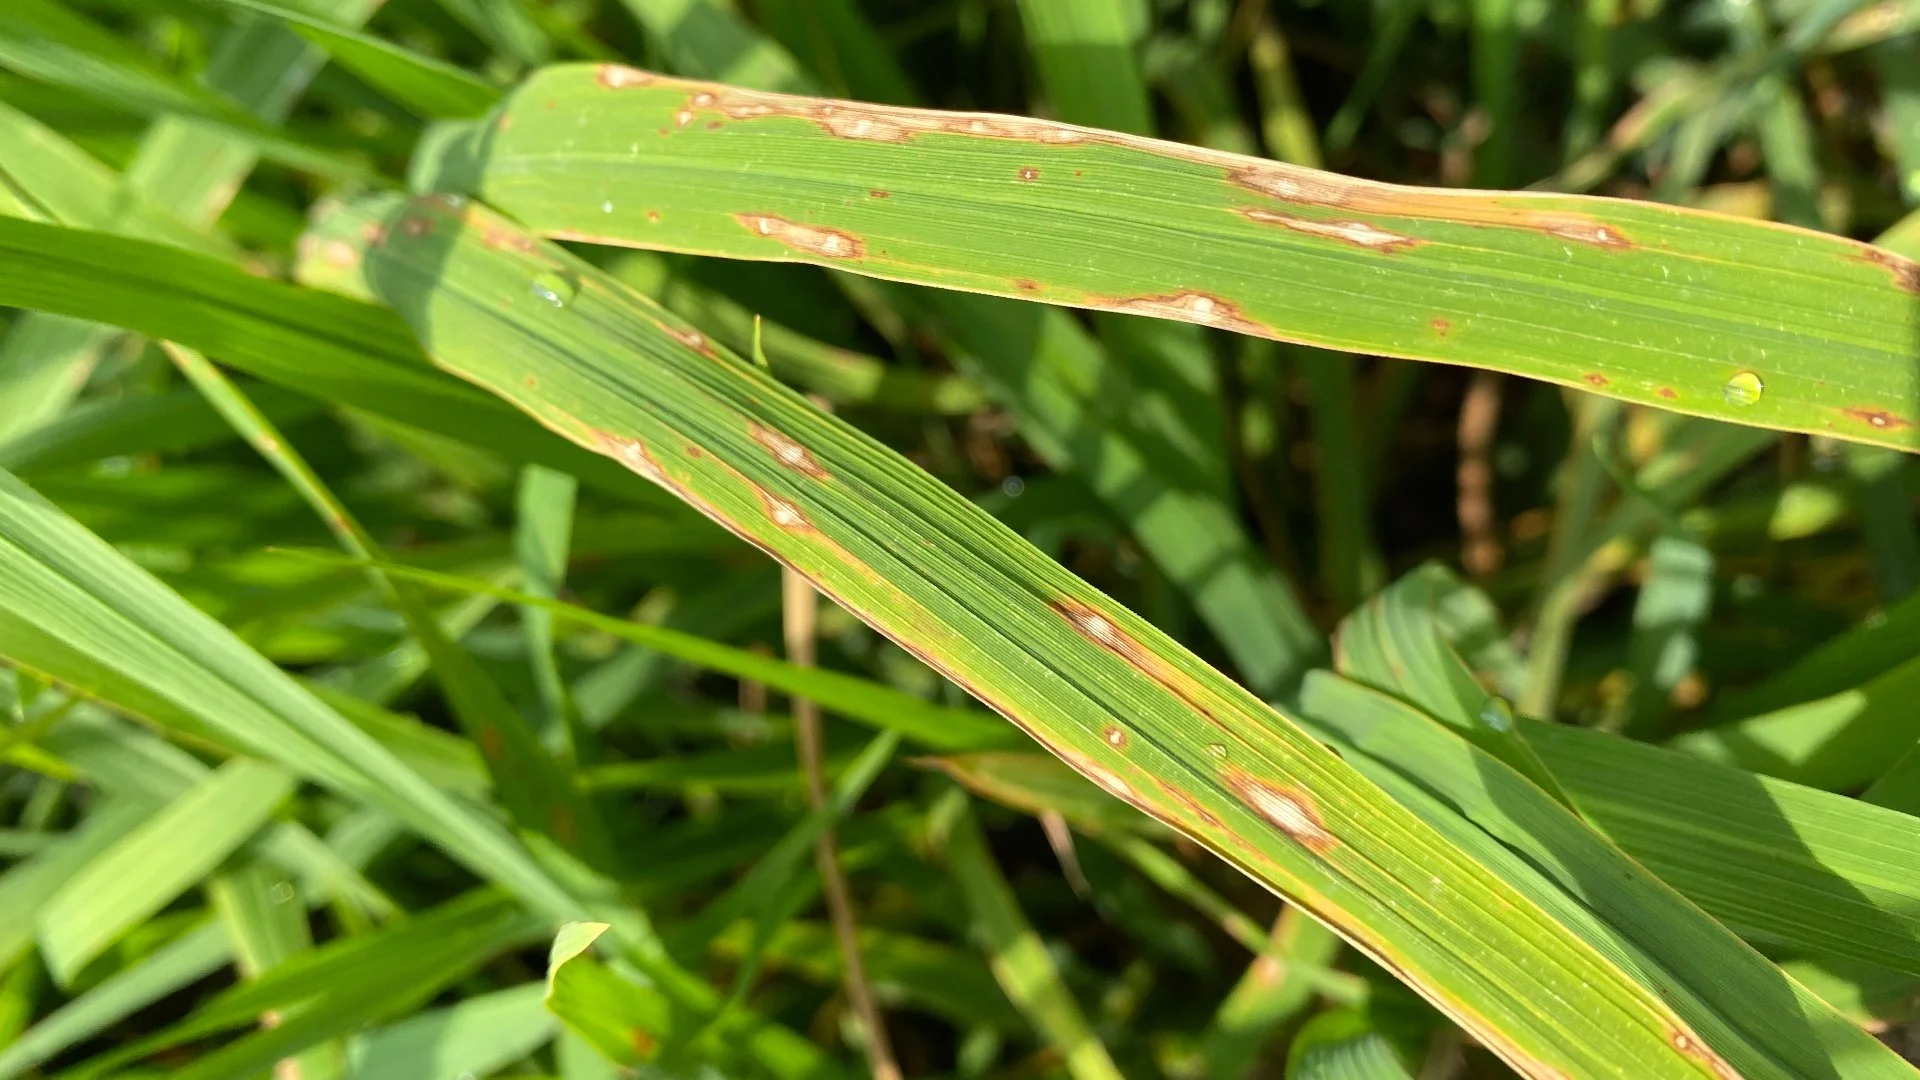 How Do You Treat Leaf Spot Disease on Grass?